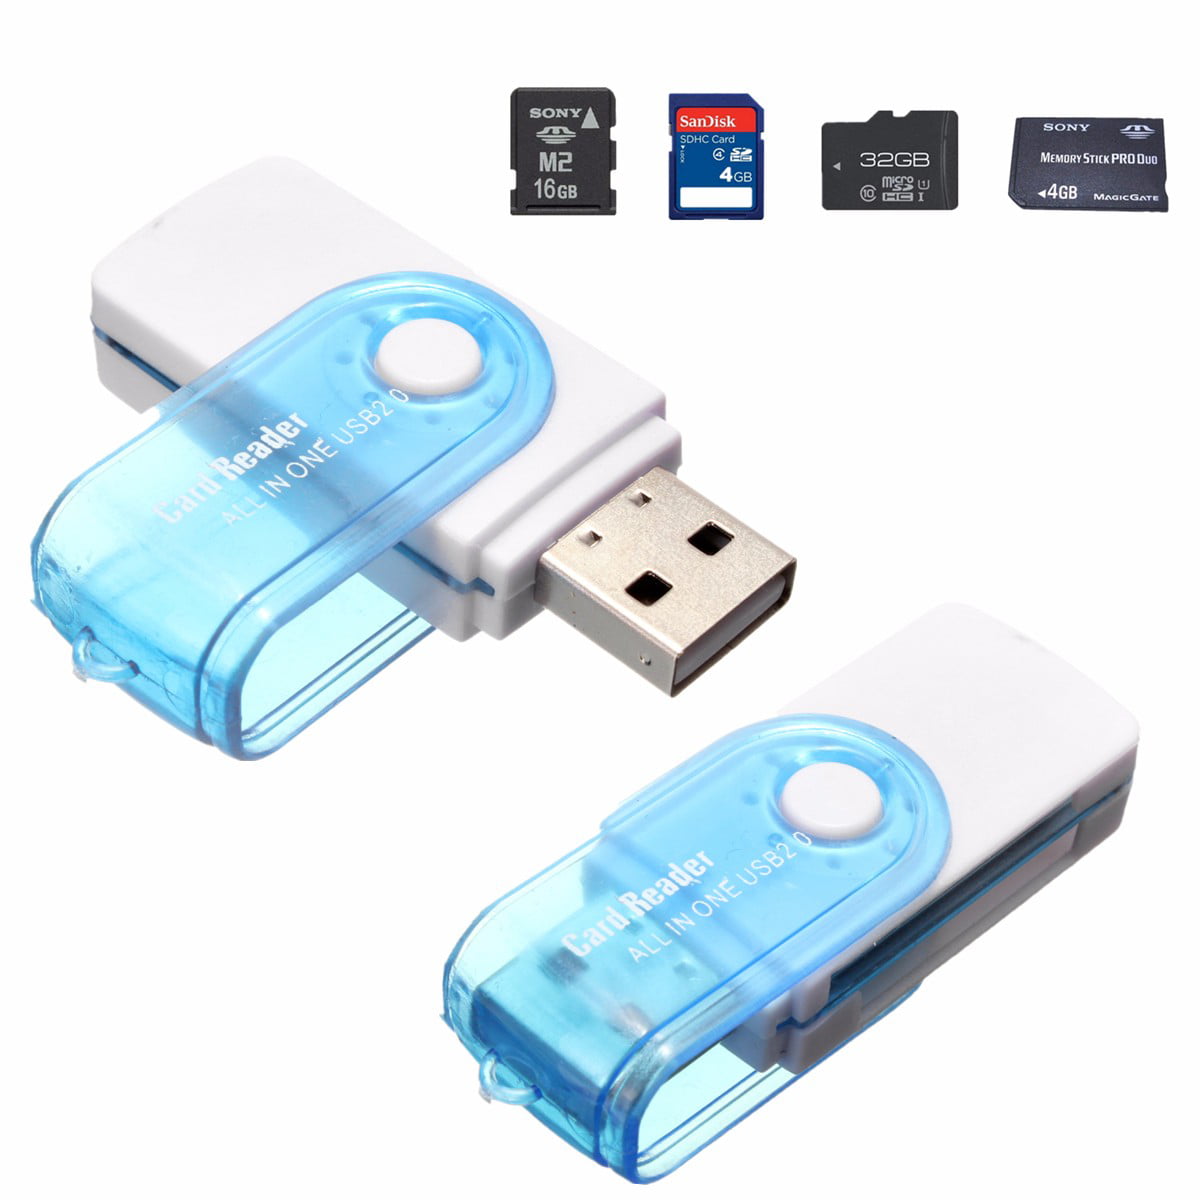 2 pcs Aluminum CASE USB 2.0 ALL-in-1 Card Reader for Micro SD/MMC/SDHC/TF/M2/MS 